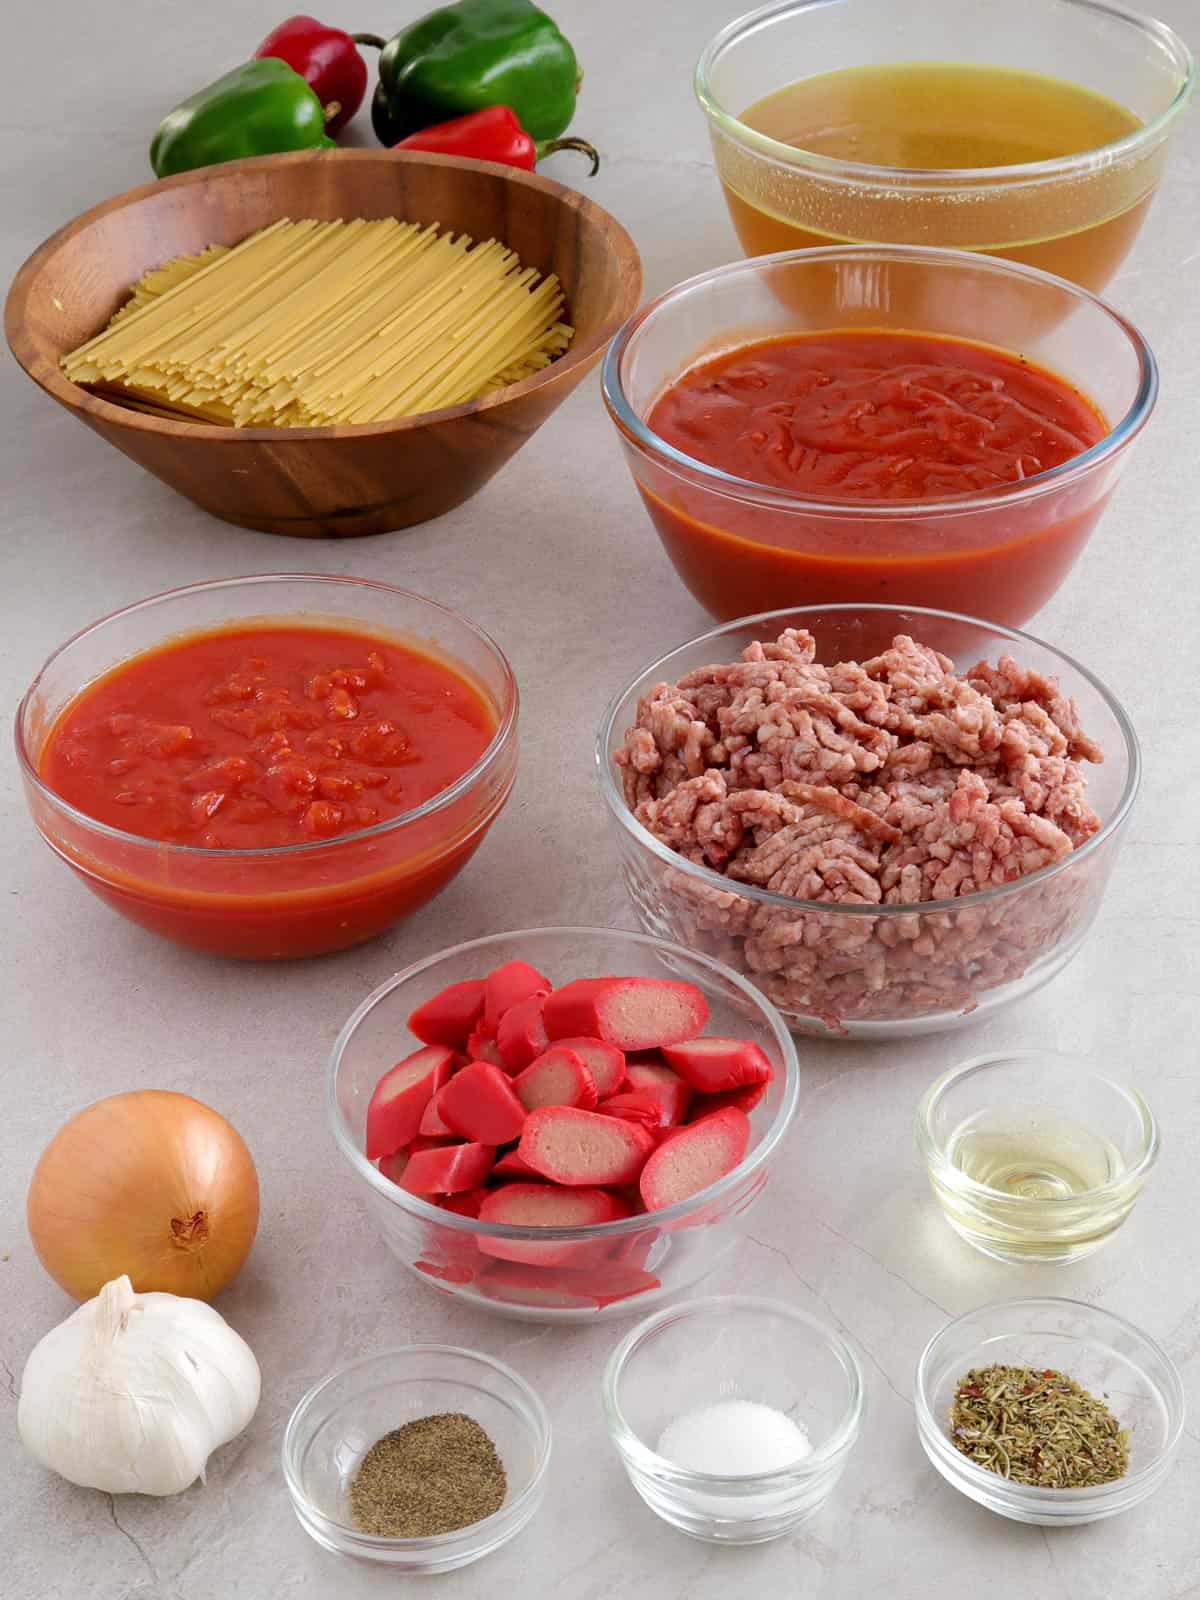 spaghetti, ground beef, ketchup, diced tomatoes, hot dogs, onion, garlic, salt, pepper, oil, broth, bell peppers in bowls